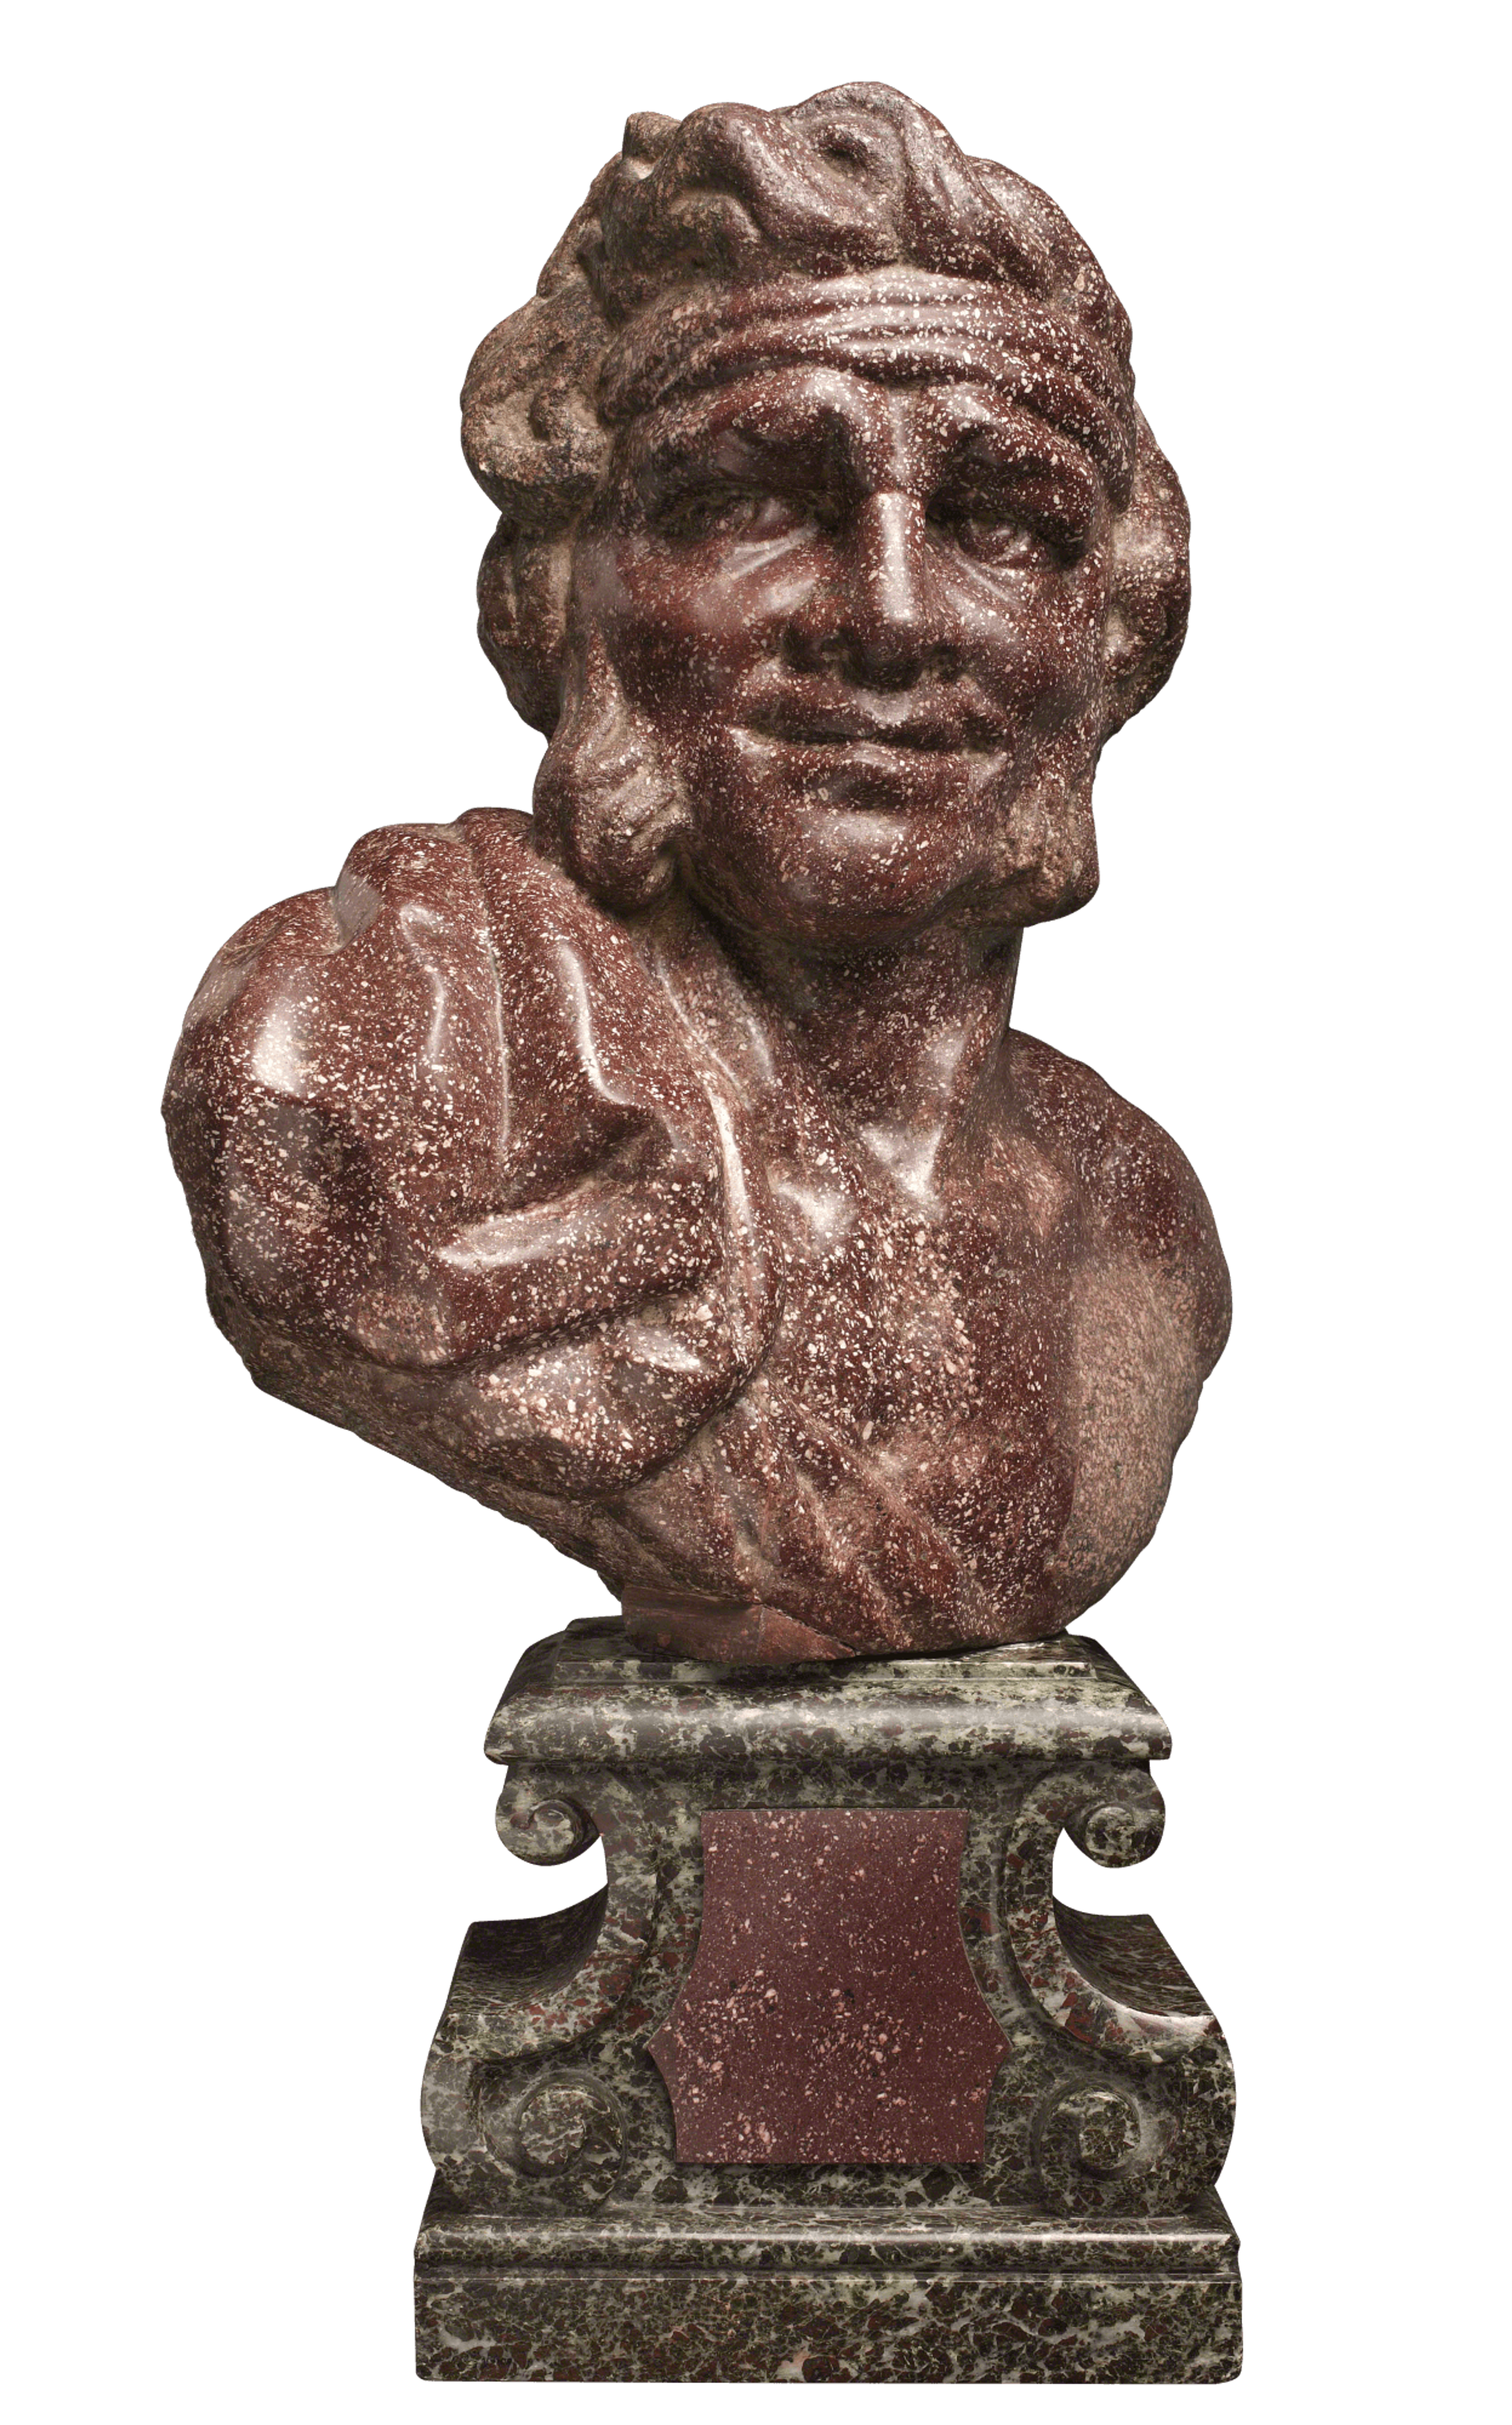 Bust of a man with sideburns